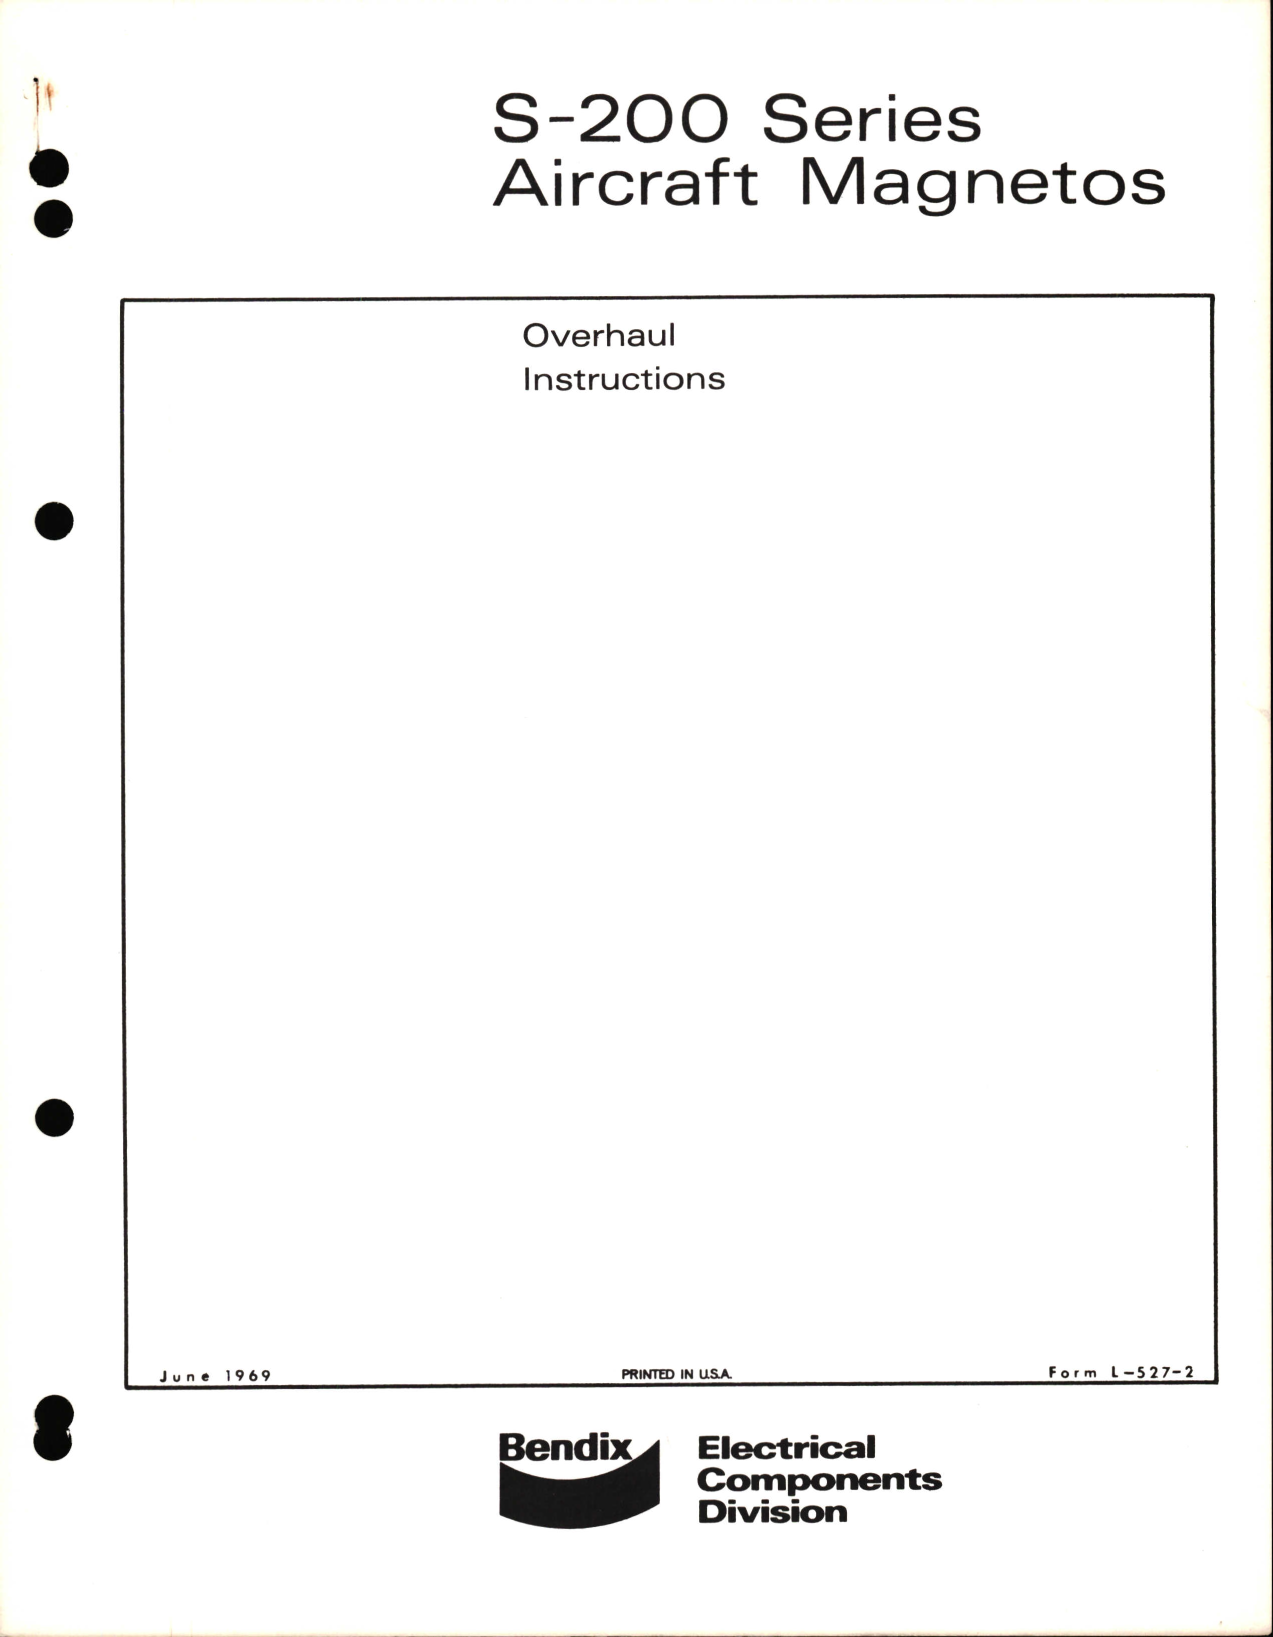 Sample page 1 from AirCorps Library document: Overhaul Instructions for S-200 Series Aircraft Magnetos